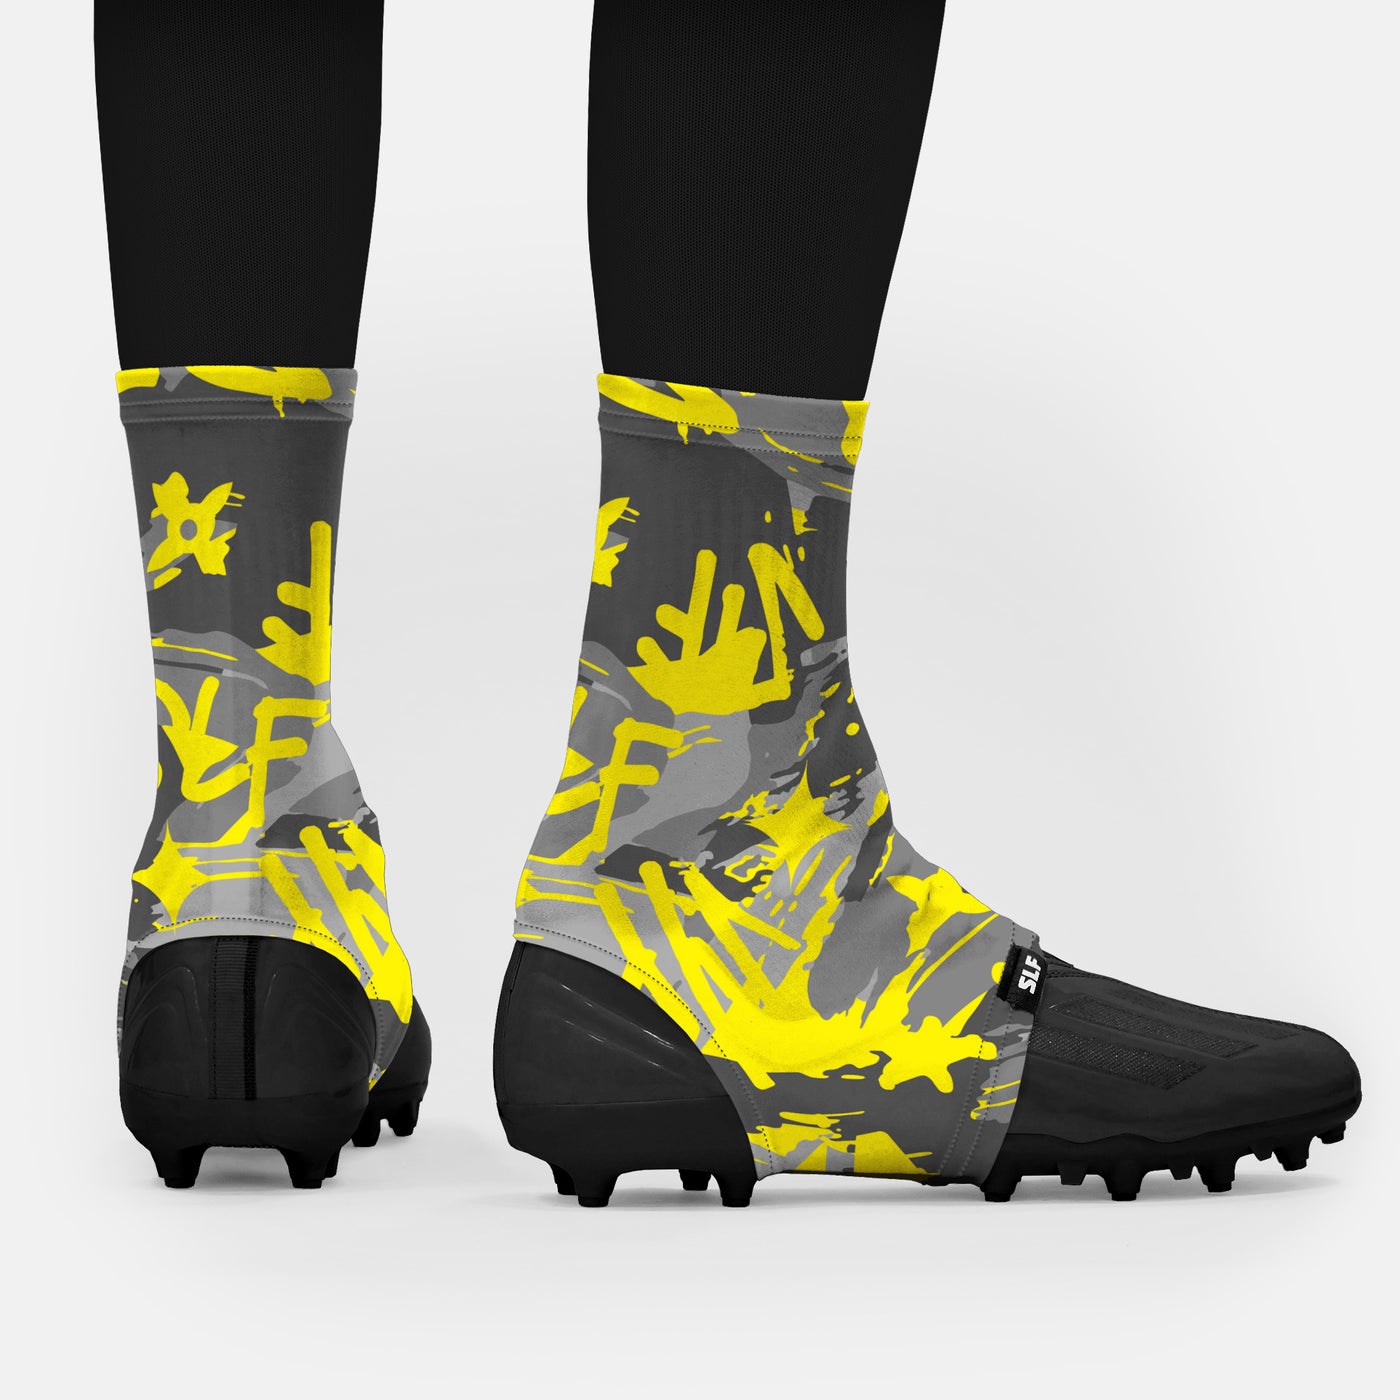 SLF Radiante Camo Spats / Cleat Covers